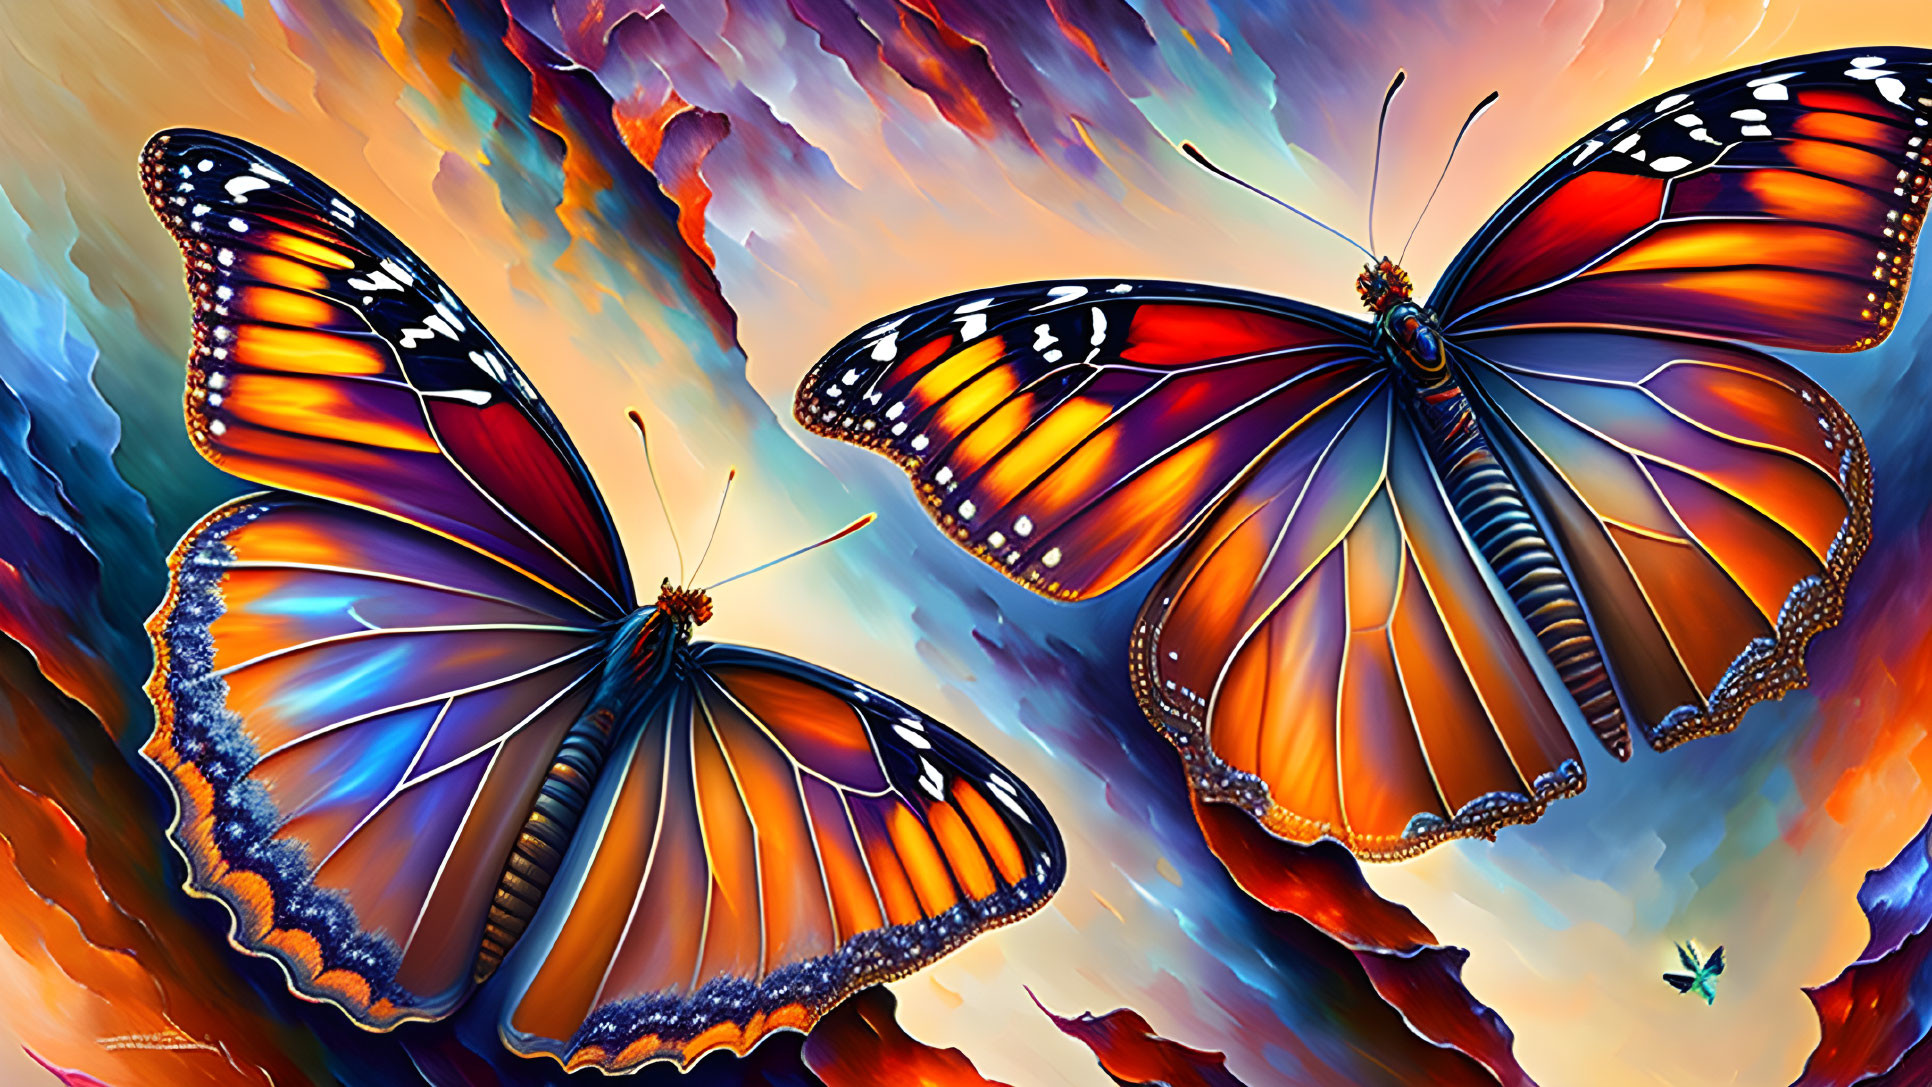 Colorful Butterflies with Orange, Black, and Blue Wings on Abstract Background